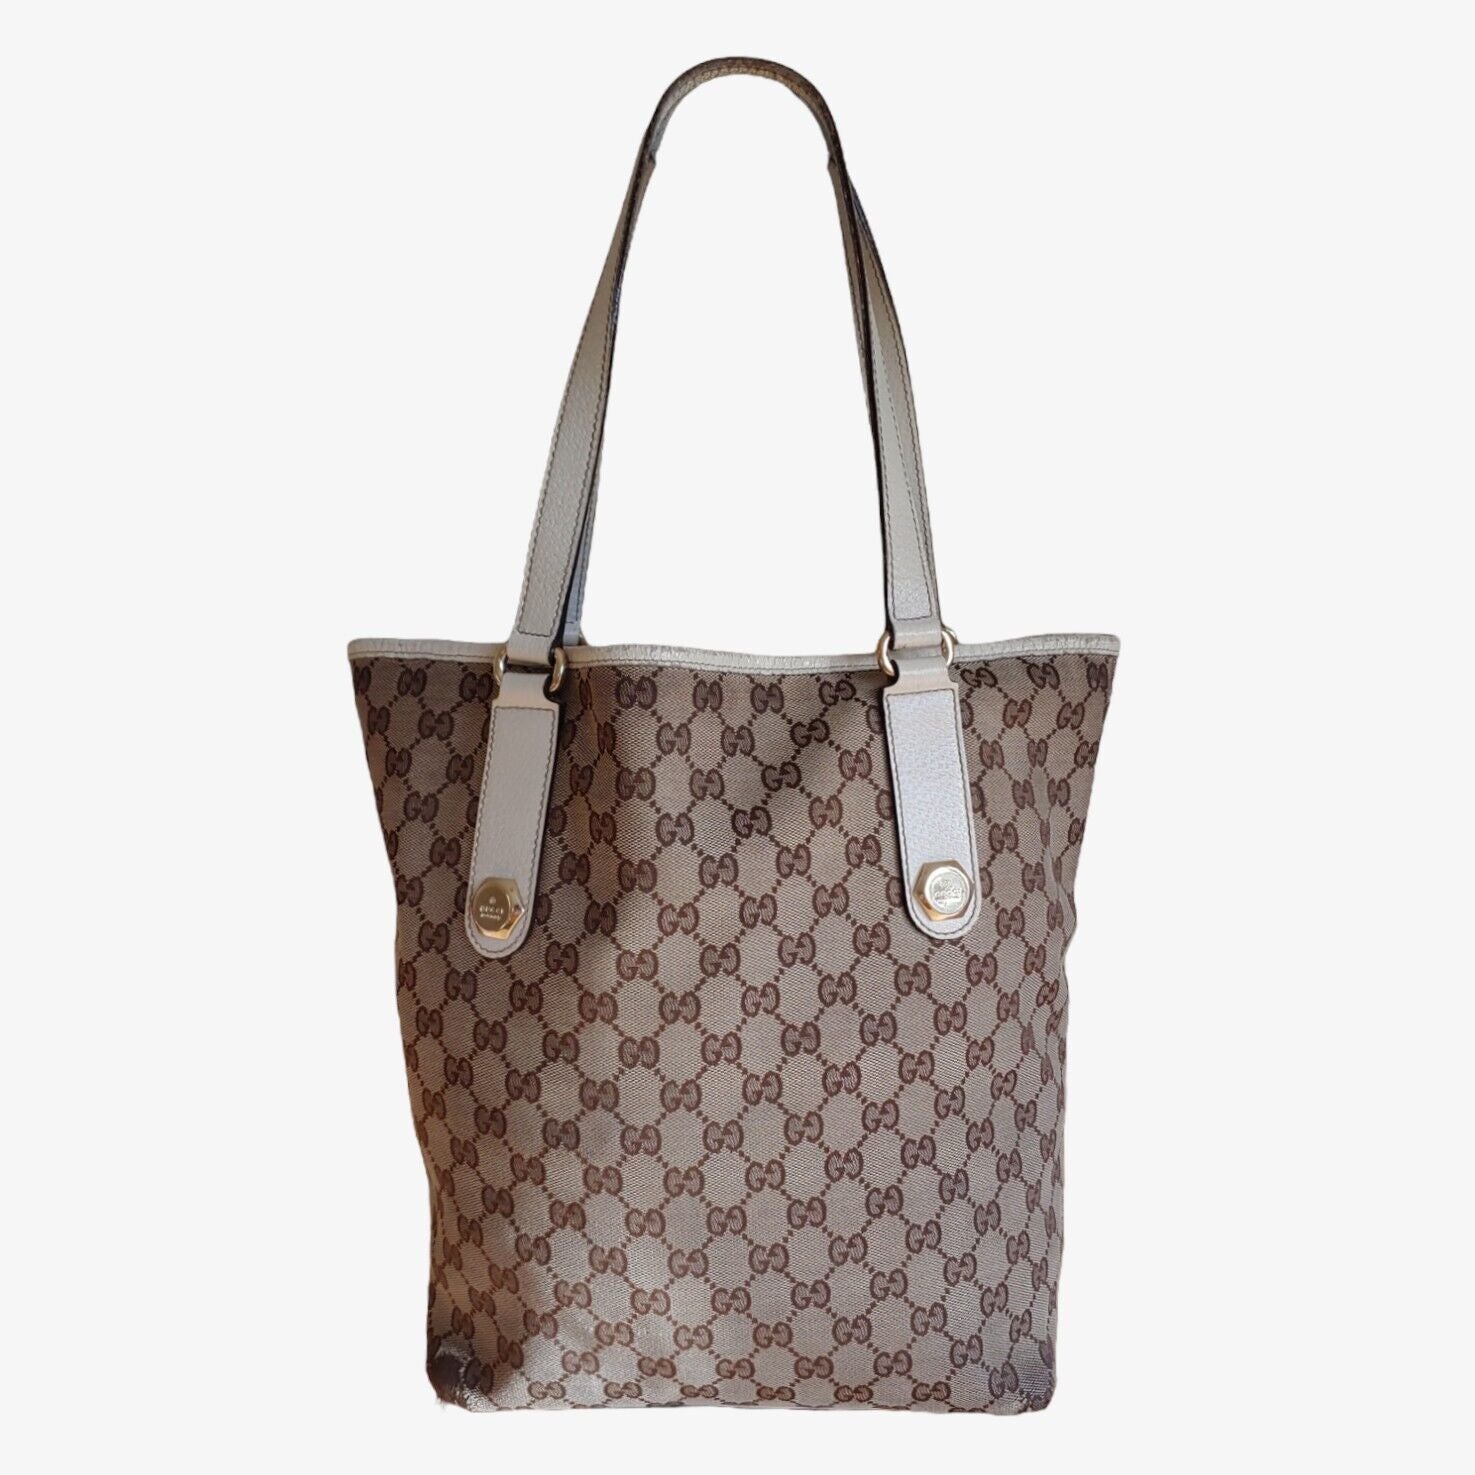 Vintage Gucci GG Large Canvas Patterned Tote Bag Leather Handles 153009467891 _ Casspio's Dream